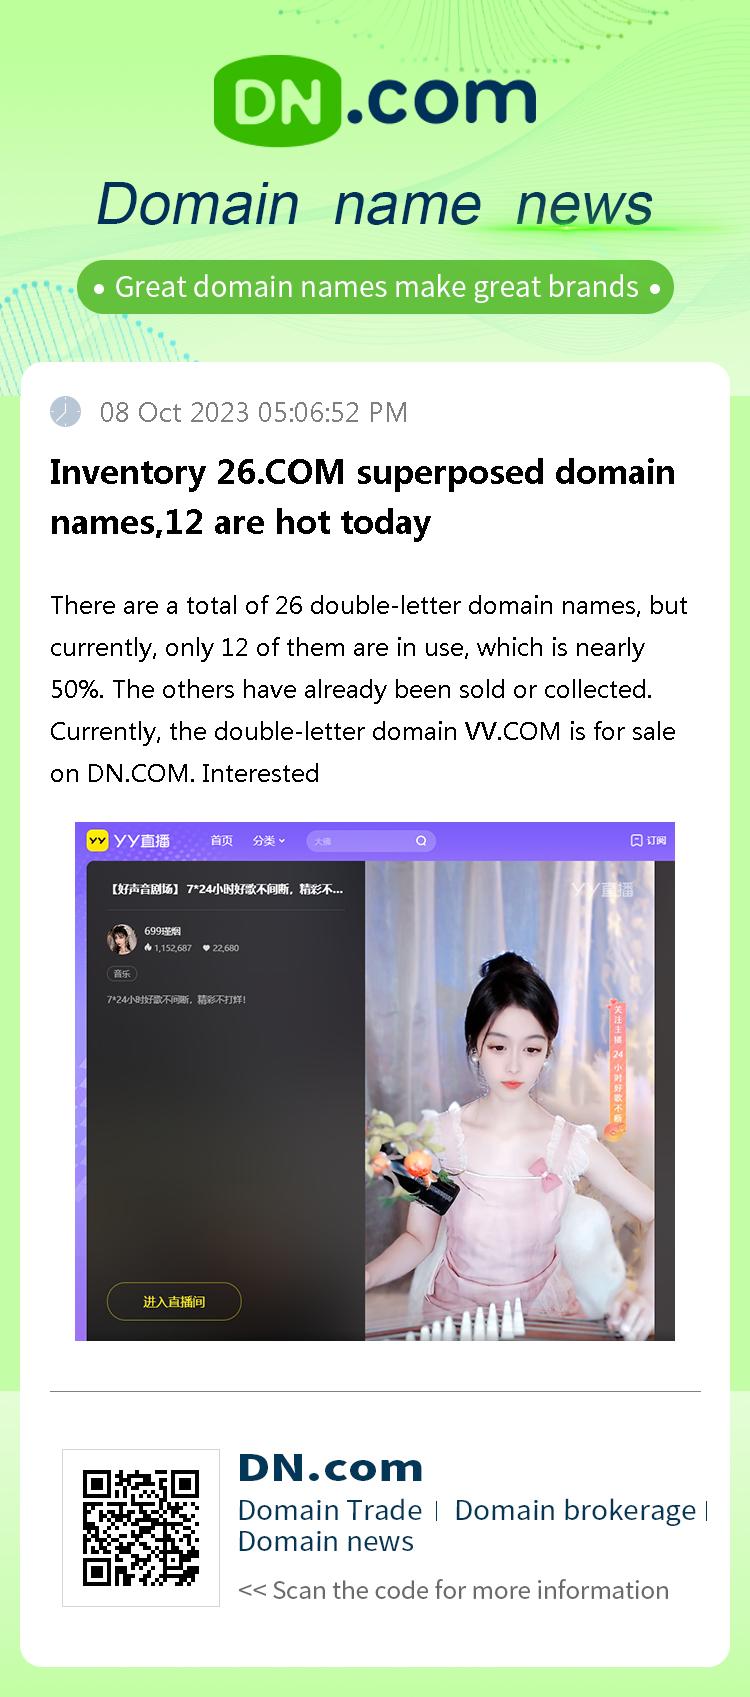 Inventory 26.COM superposed domain names,12 are hot today